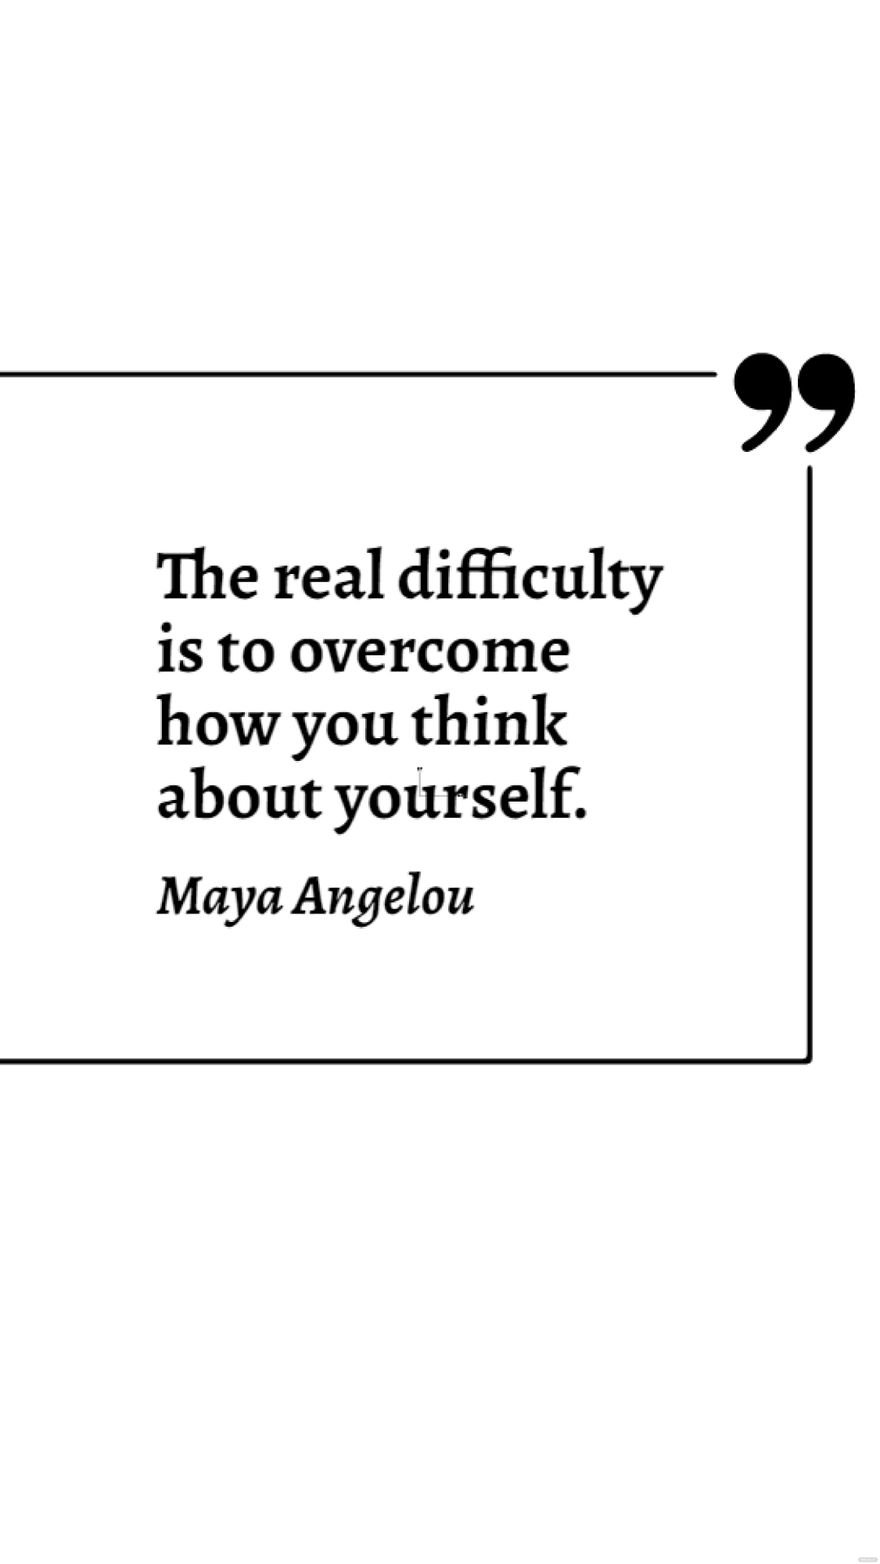 Maya Angelou - The real difficulty is to overcome how you think about yourself.